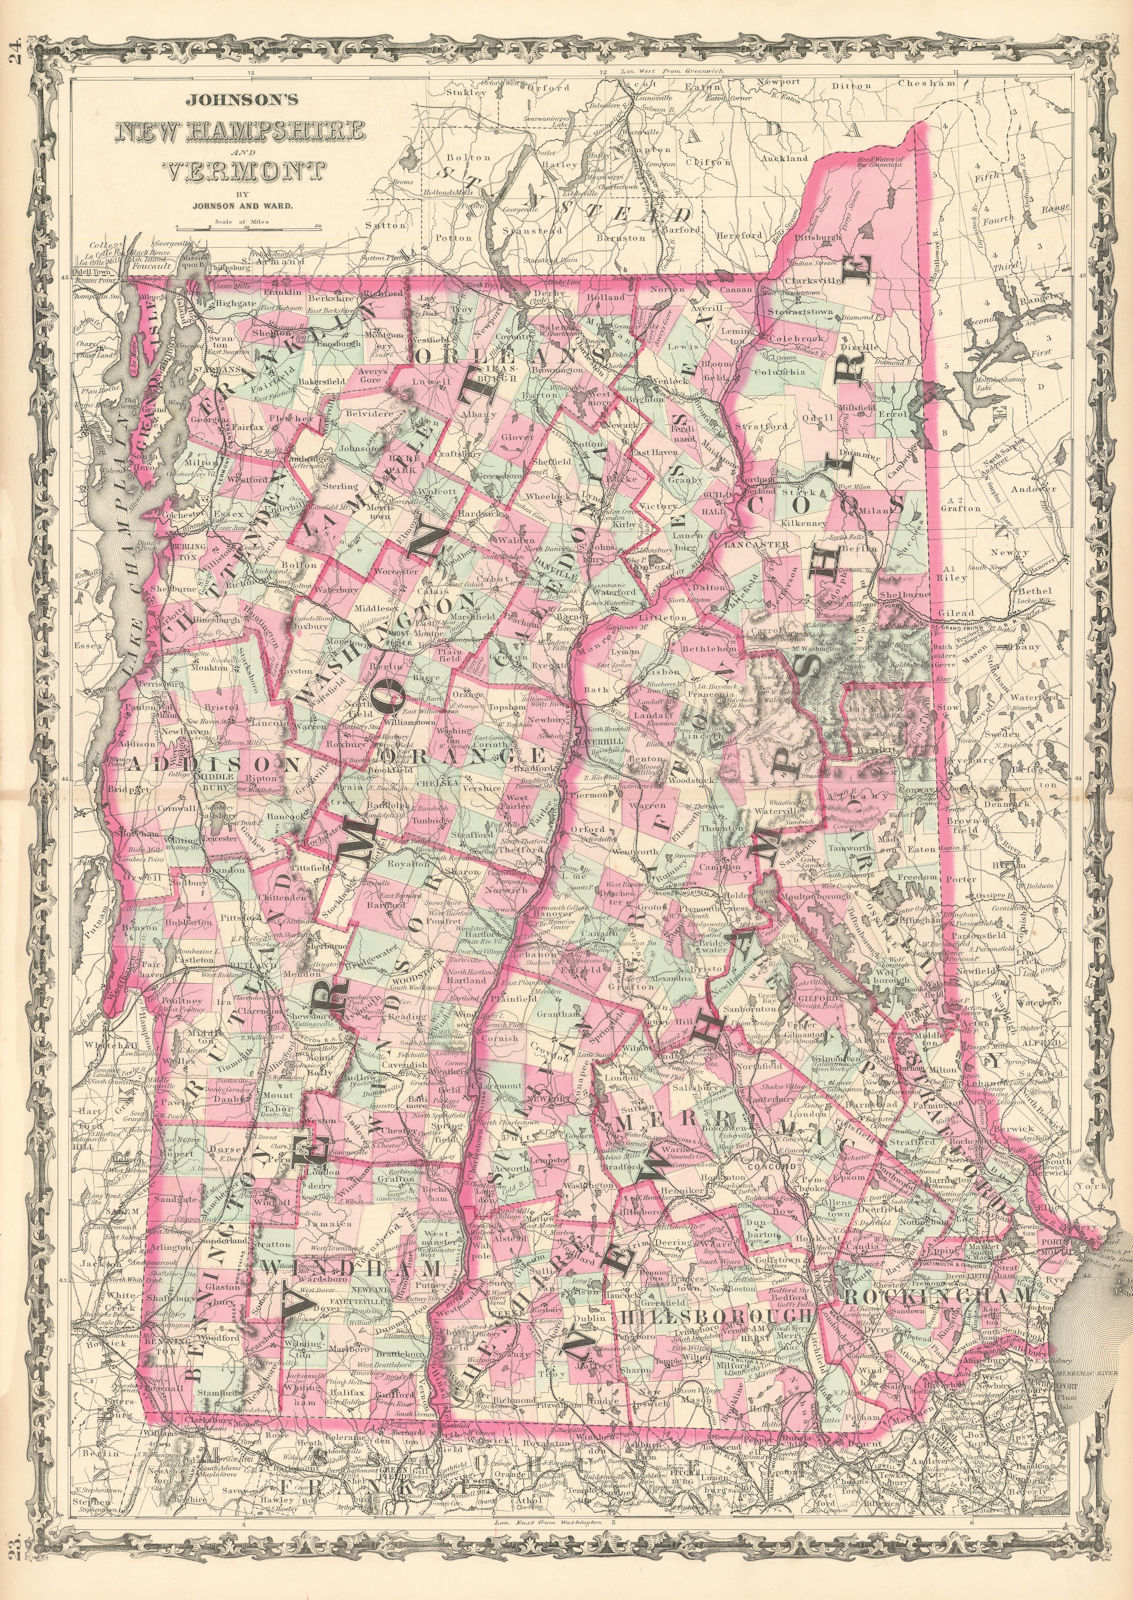 Johnson's New Hampshire & Vermont. US State map showing counties 1863 old